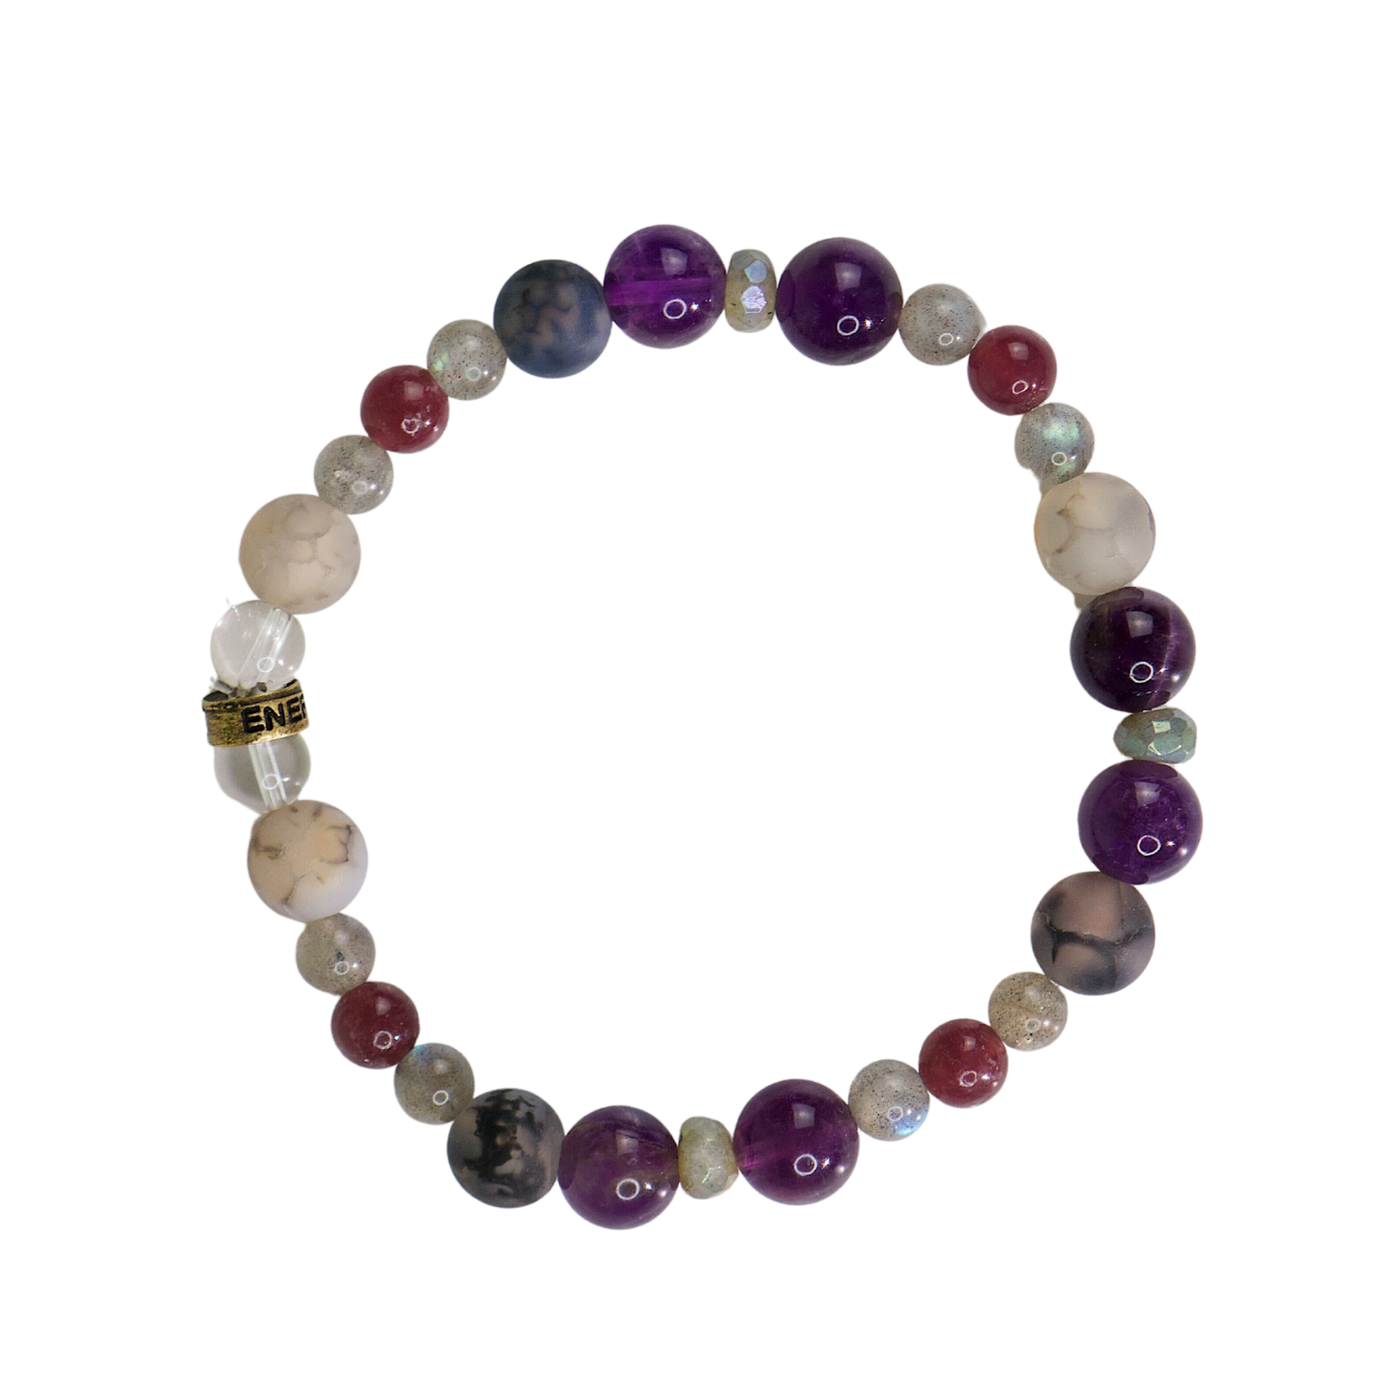 Overhead view of new exclusive crystal formula Miracles Bracelet by Energy Muse featuring Amethyst, Lepidolite, Web Agate, Labradorite, and Aura Gray Moonstone and finished with engraved Energy Muse rondelle bead and two Clear Quartz charging beads.